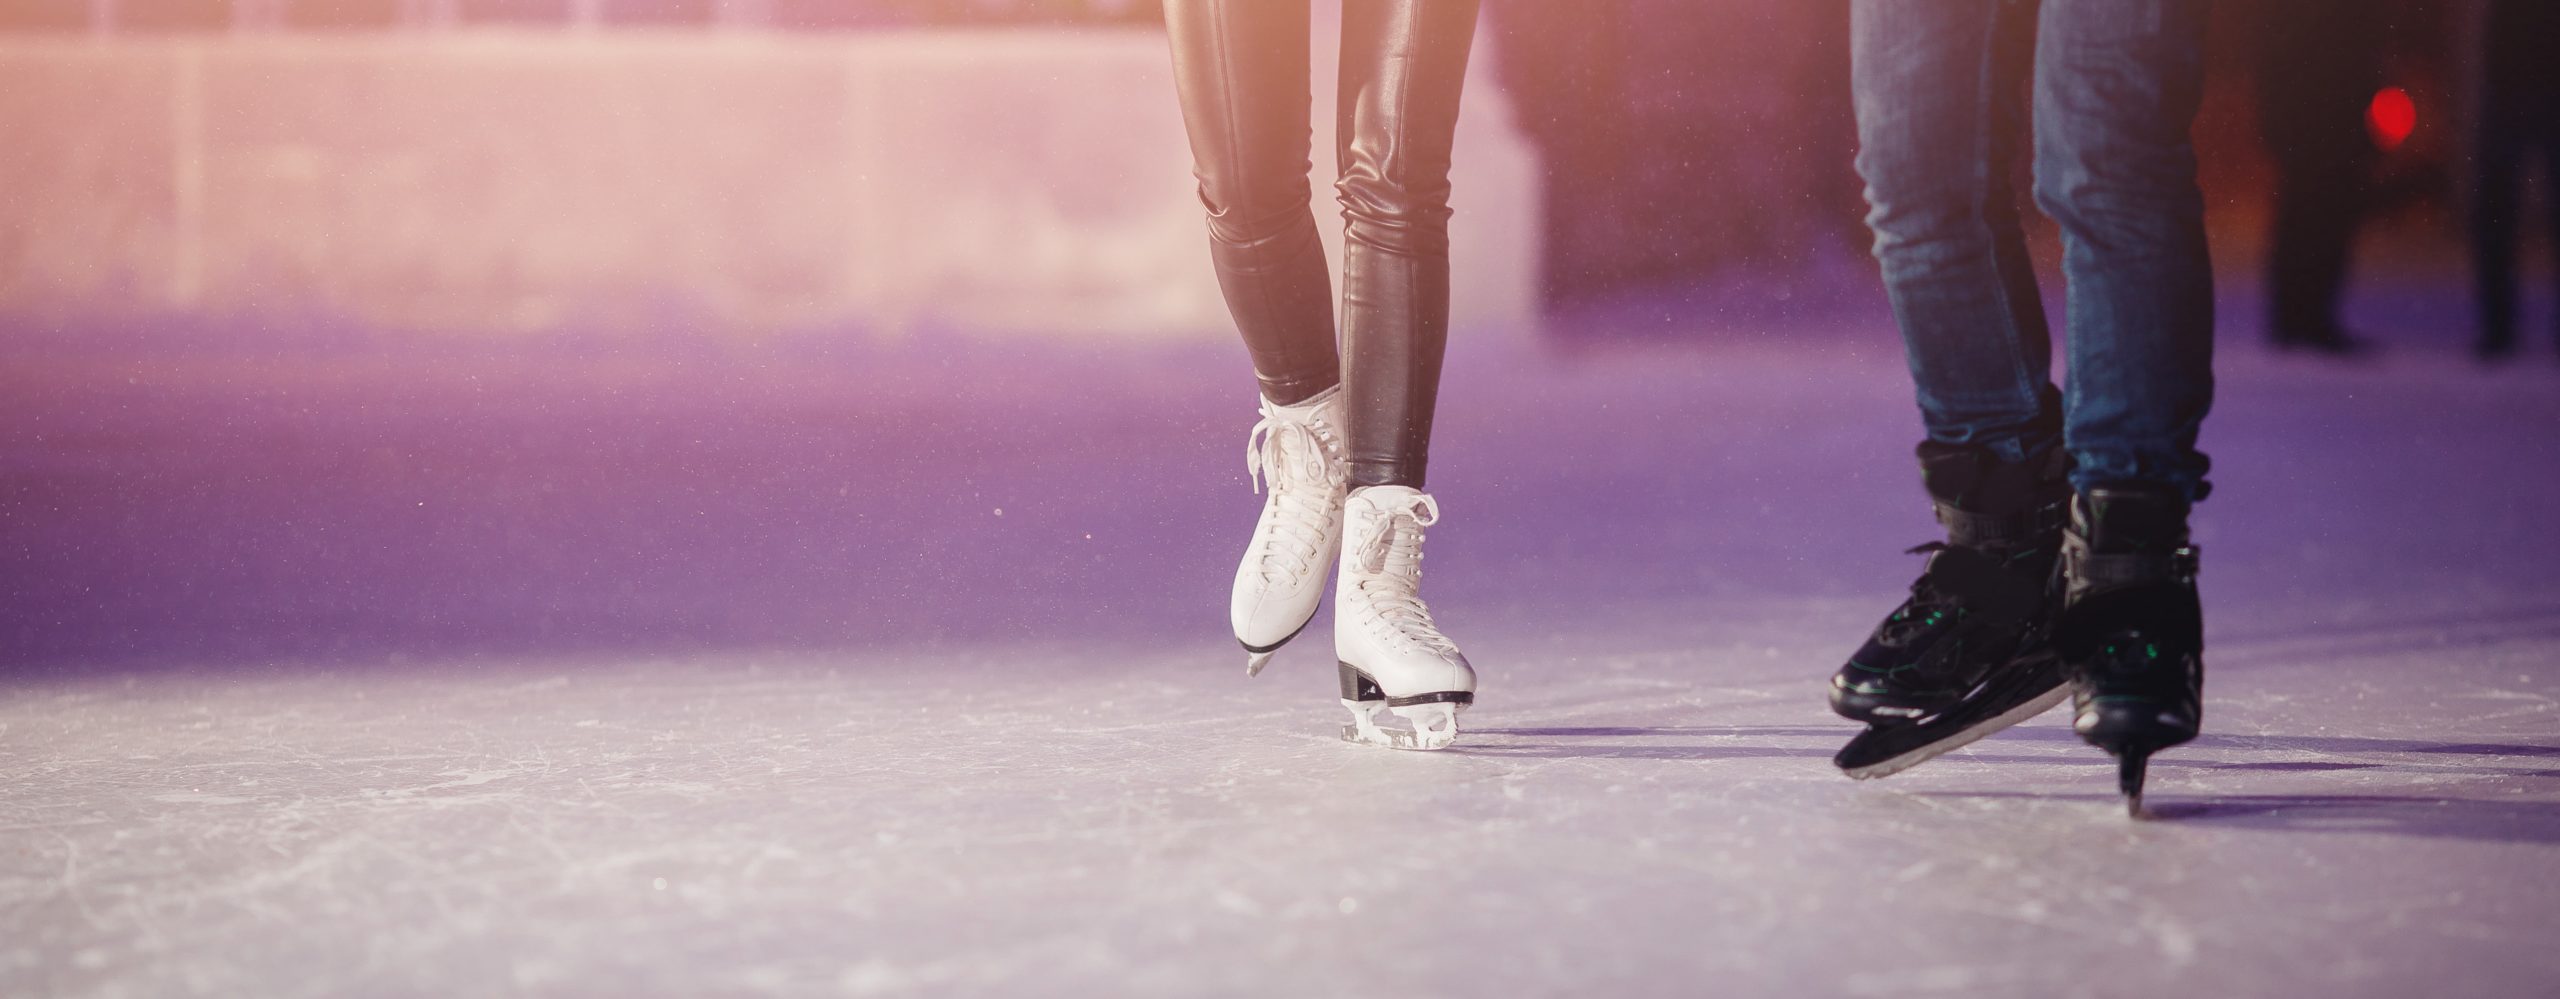 Girl and boy skating on ice on a date, shot of their lower legs on the ice